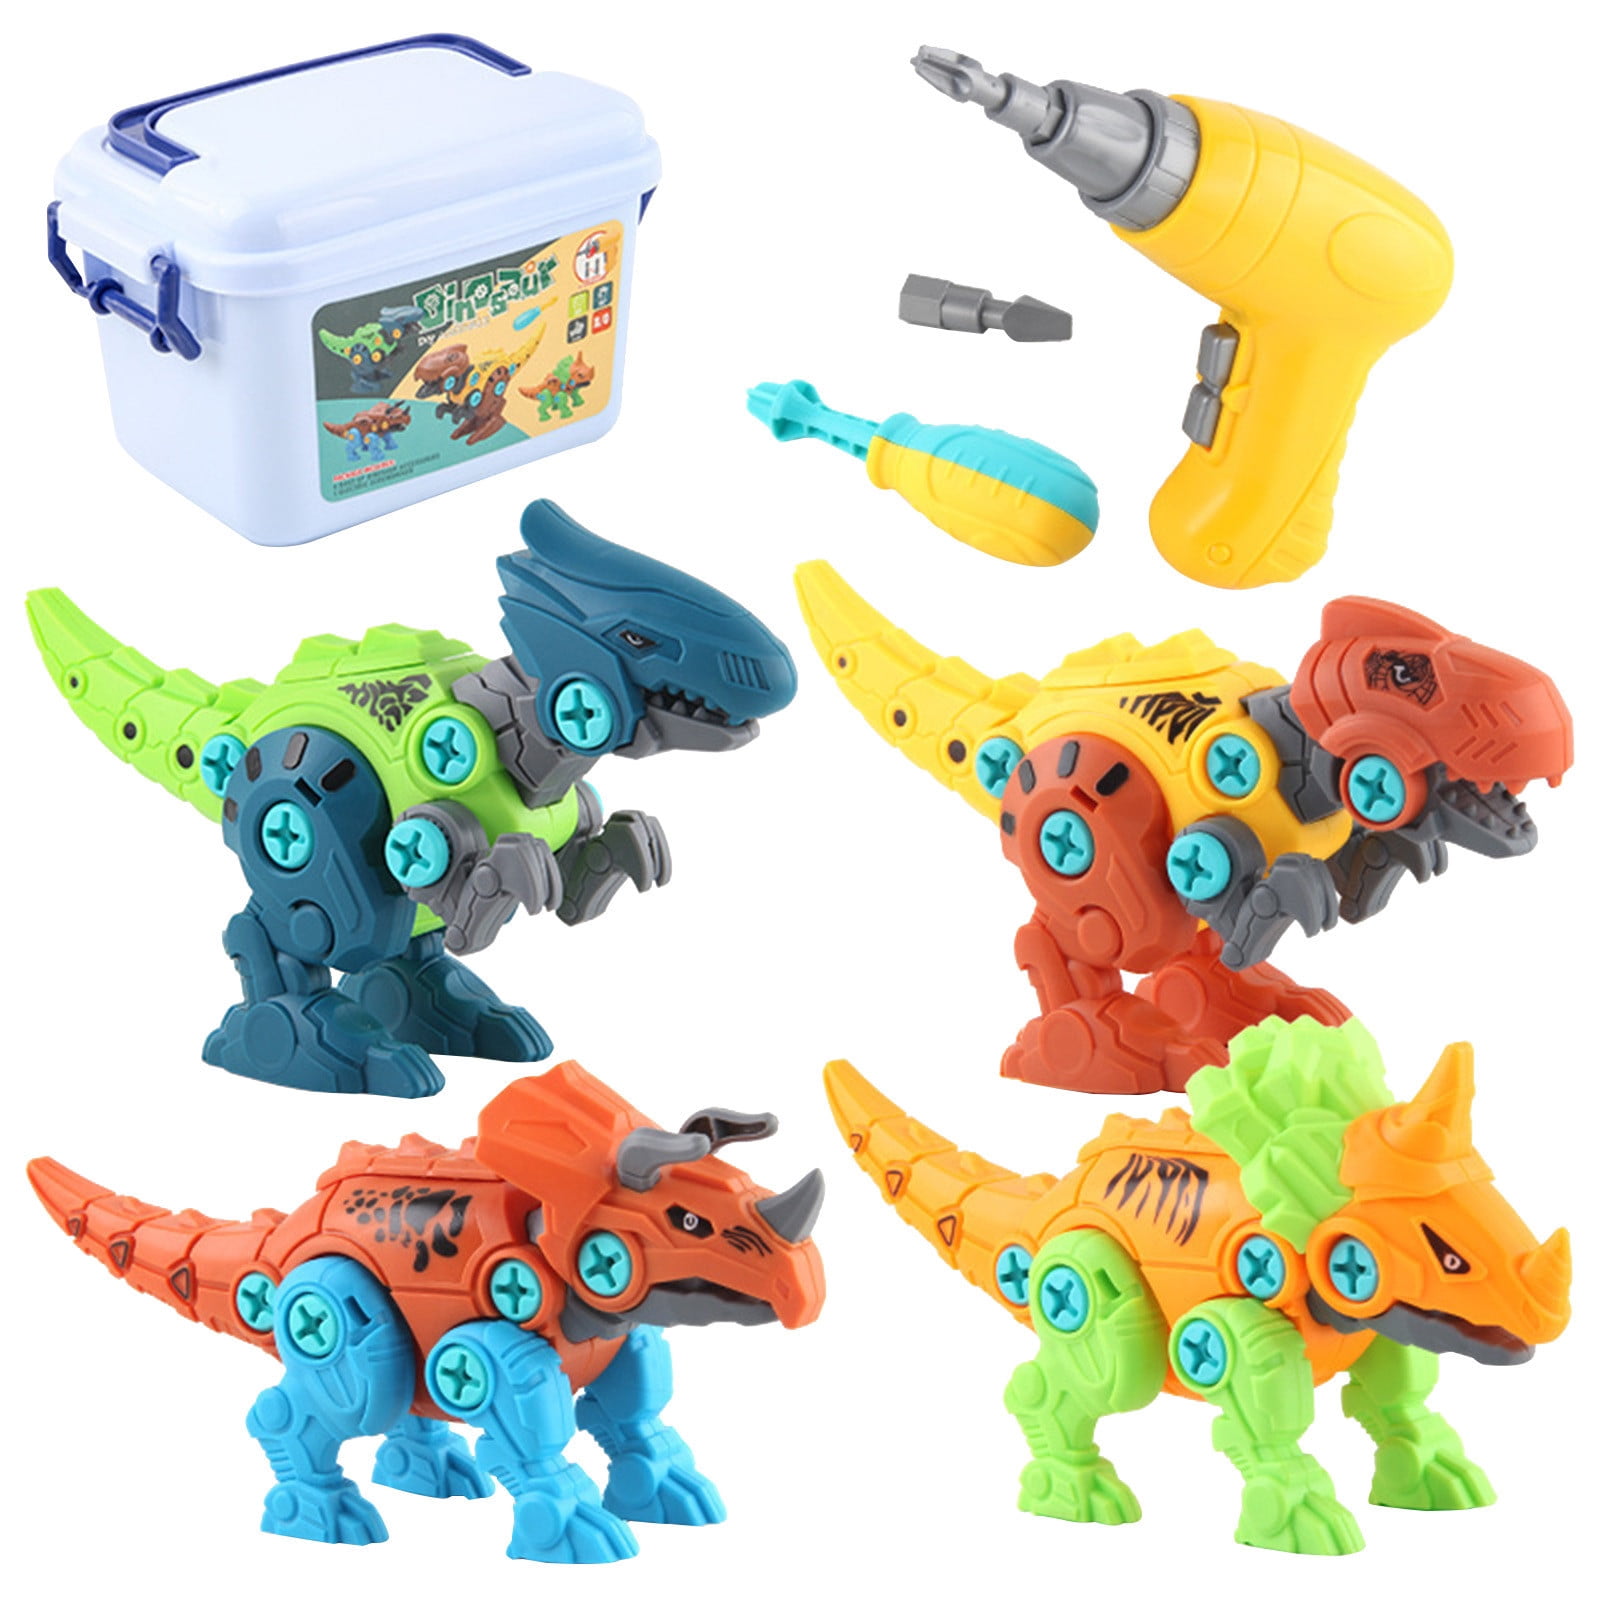 Fridja Dinosaur Toys, Take Apart Toys with Dinosaur Eggs,STEM Building  Learning Toy Set for Kids 3 4 5 6 7 Years Old Girls Boys Easter Christmas  Birthday Gifts 